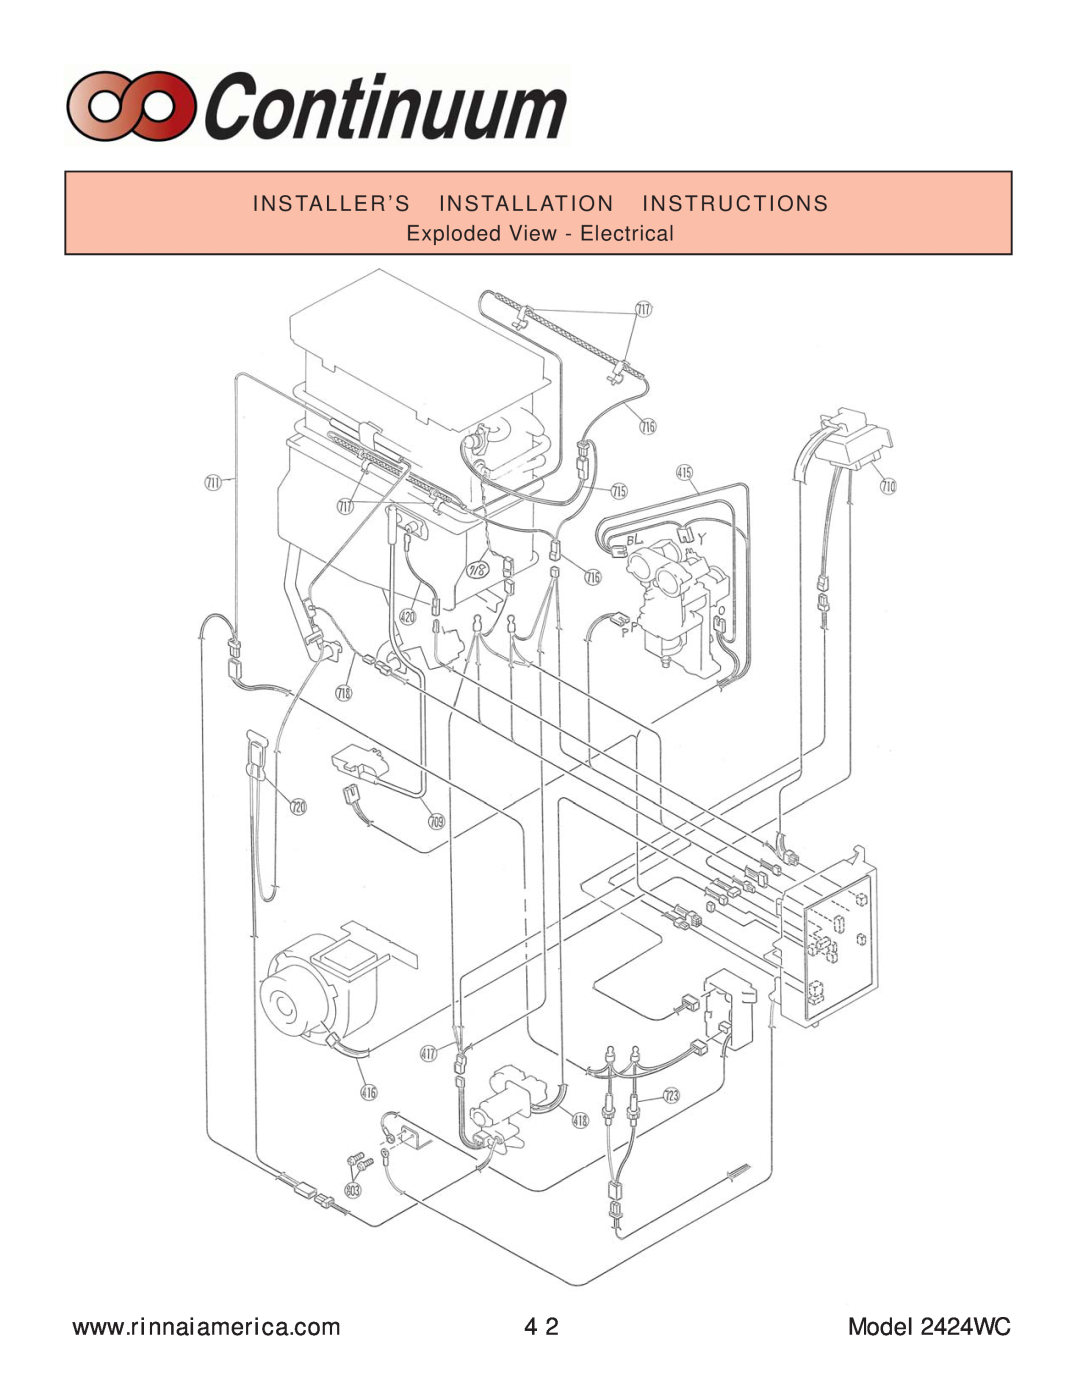 Rinnai manual Model 2424WC, Installer’S Installation Instructions, Exploded View - Electrical 